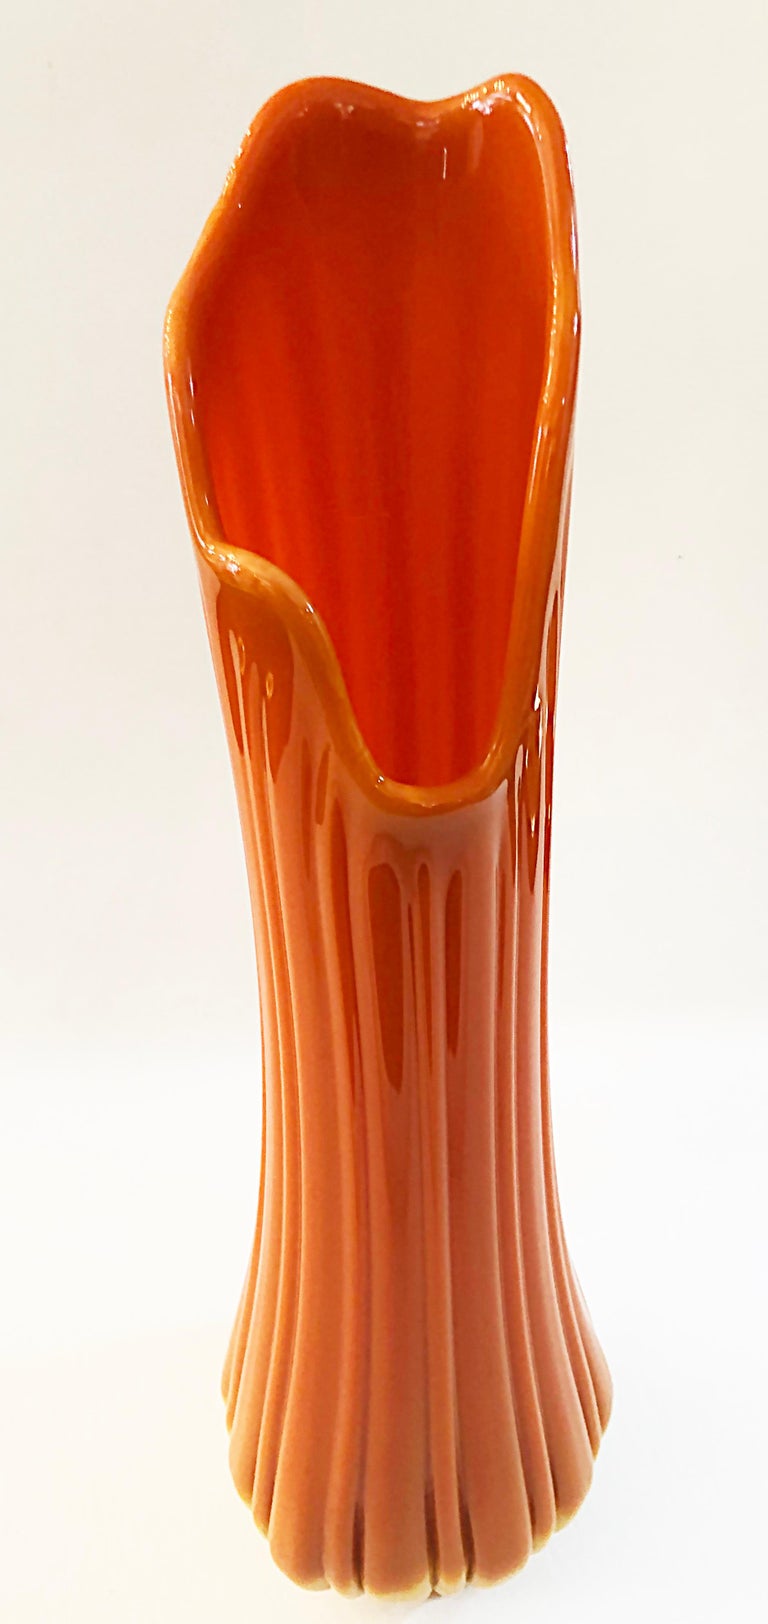 Viking Swung Orange Glass Vase Attributed to L.E. Smith, 1960s For Sale 1